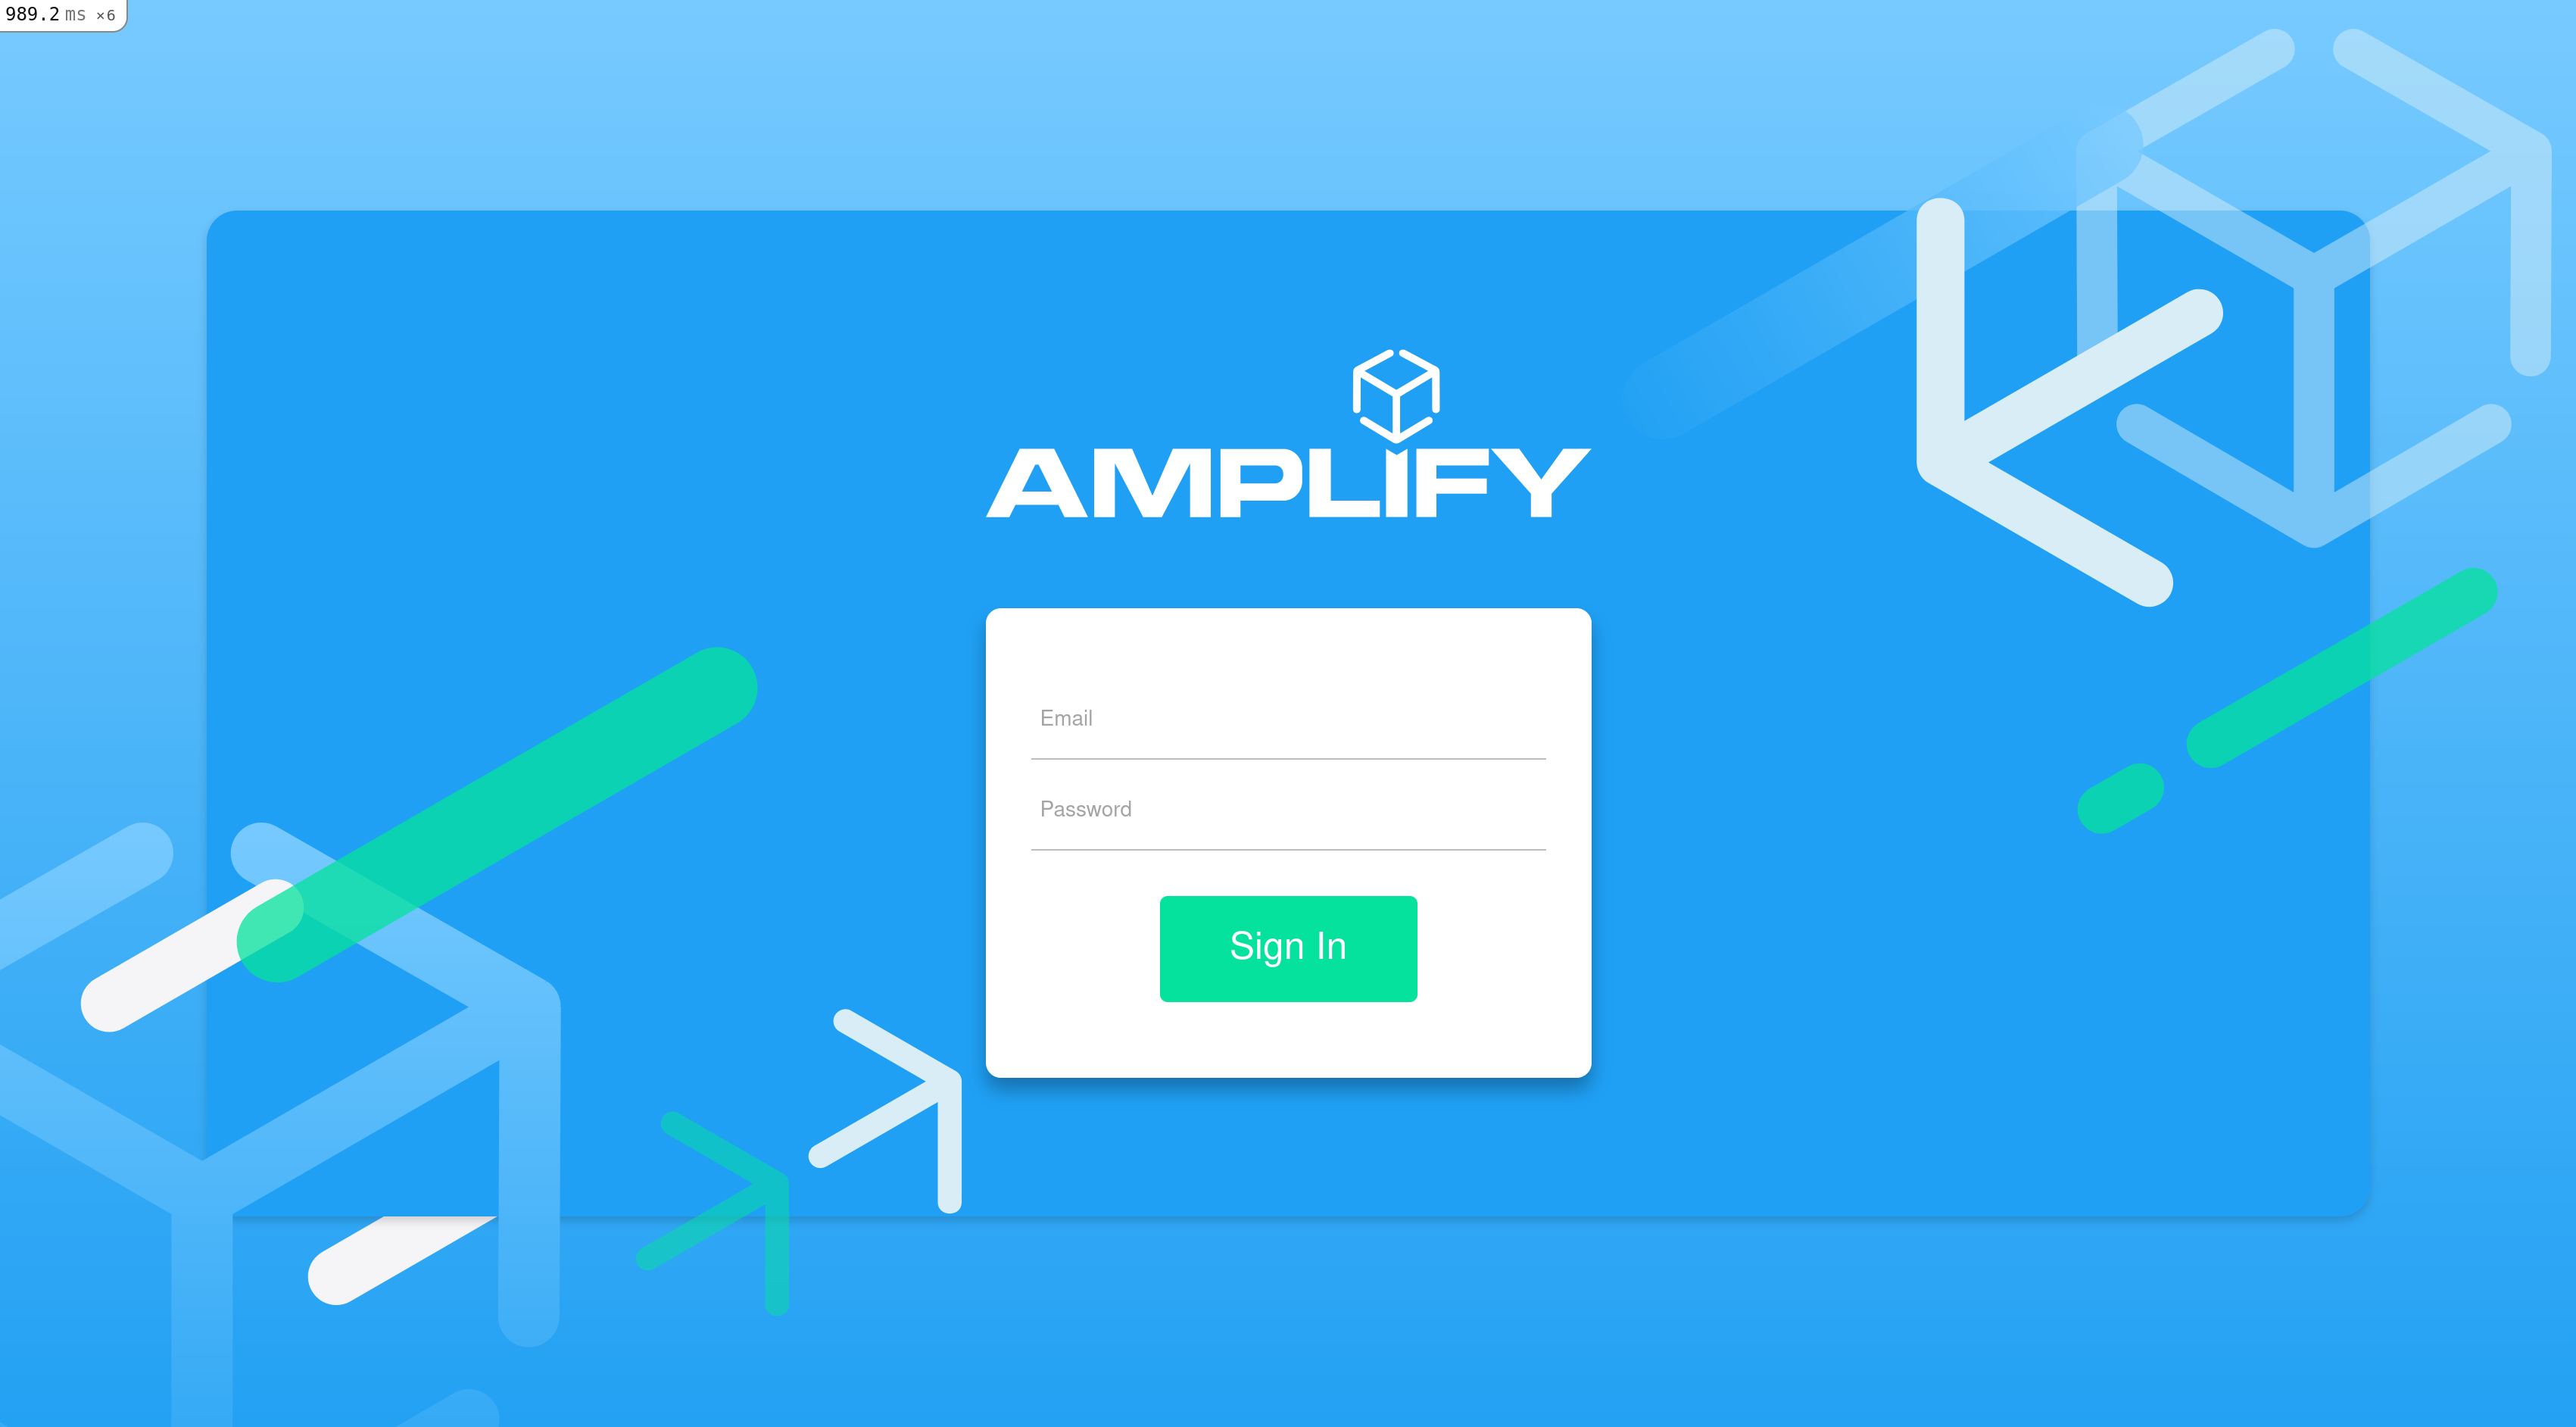 Amplify sign in screen with new design